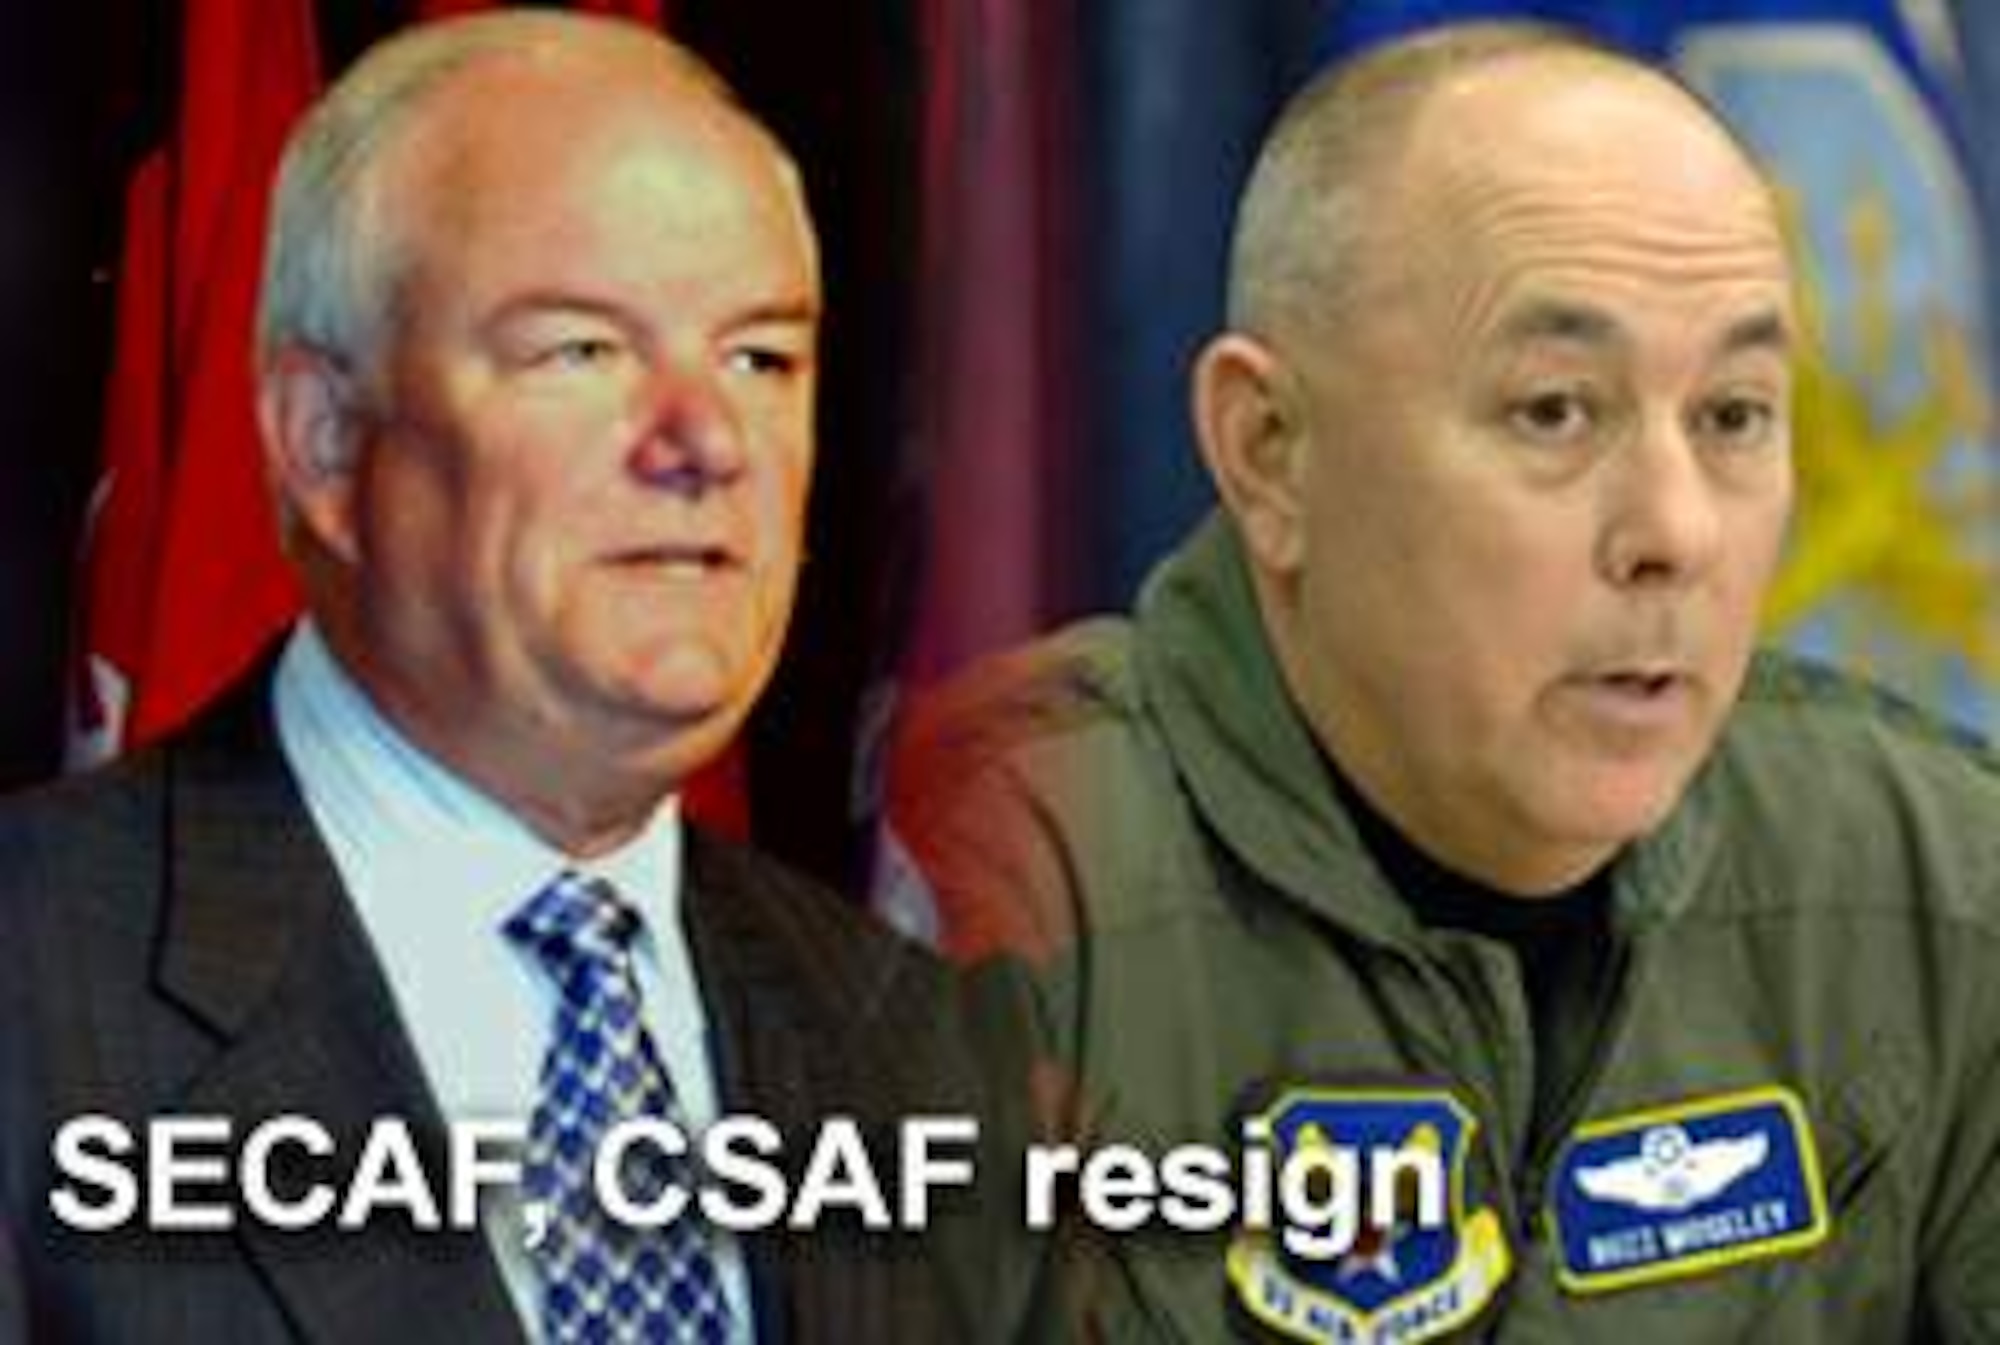 Secretary of the Air Force Michael W. Wynne and Chief of Staff of the Air Force Gen. T. Michael Moseley tendered their resignations to Secretary of Defense Robert M. Gates June 5. (U.S. Air Force photo illustration/Mike Carabajal)